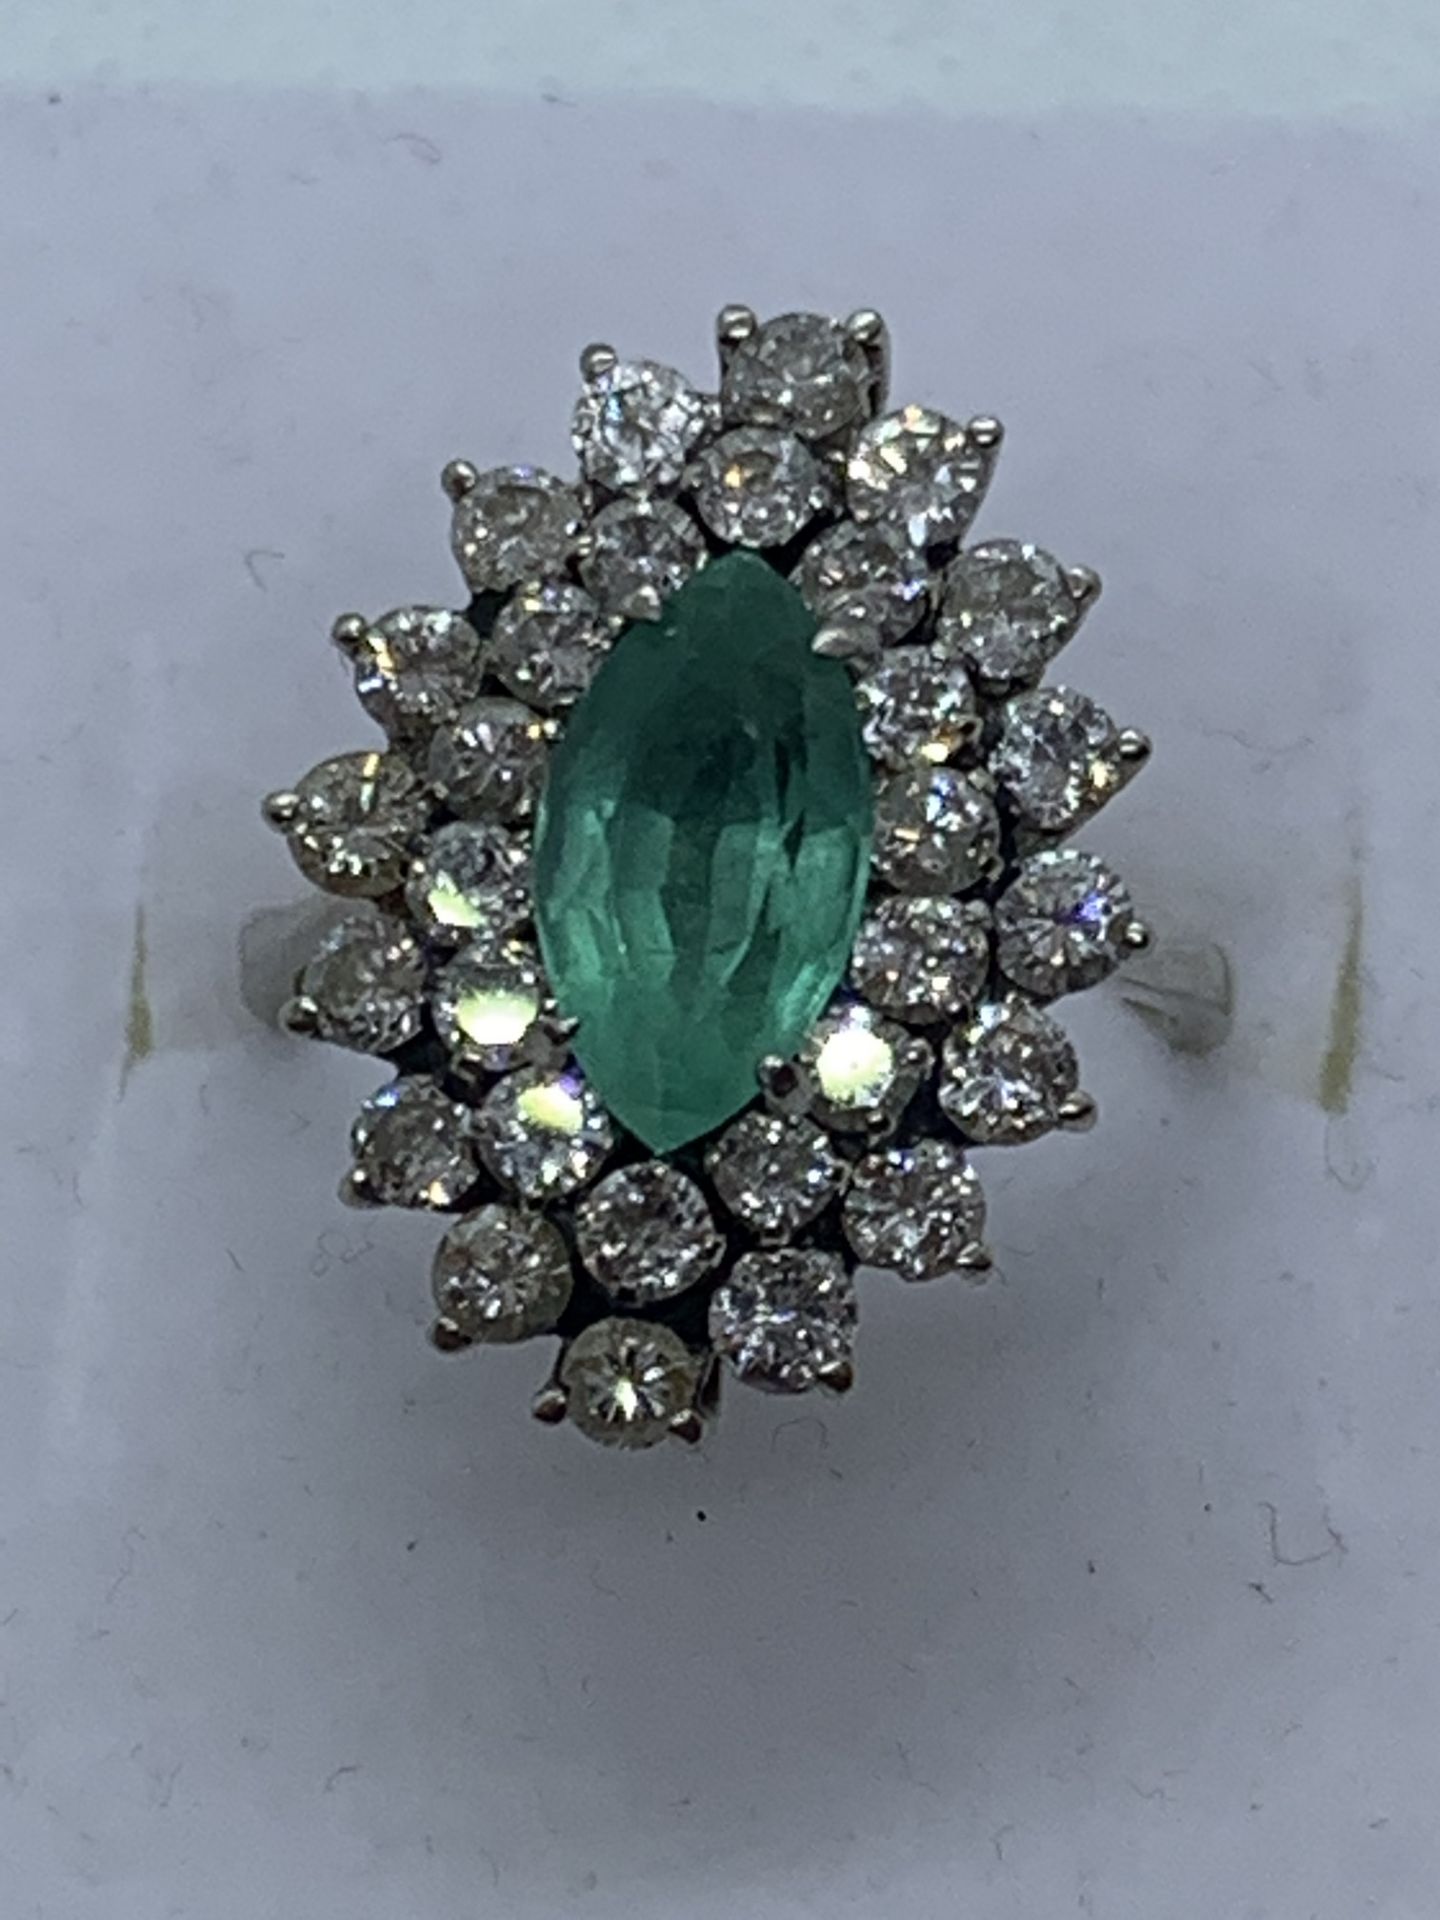 FINE EMERALD & DIAMOND RING SET IN WHITE METAL (TESTED AS WHITE GOLD) - Image 2 of 3